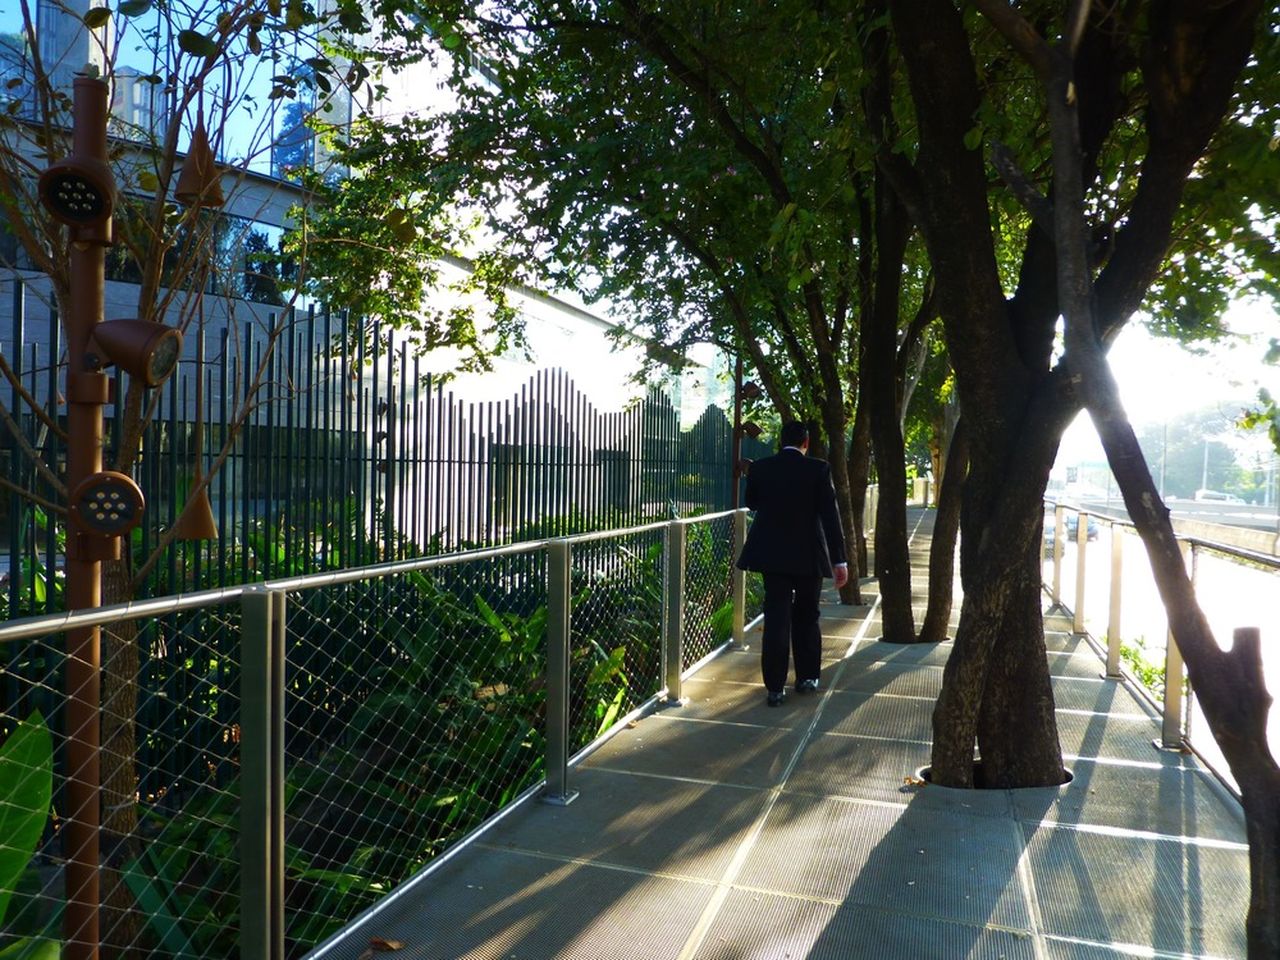 The elevated perforated metal path transforms the narrow sidewalk into a unique experience of walking in the canopies of the trees : Photo credit courtesy of © Balmori Associates